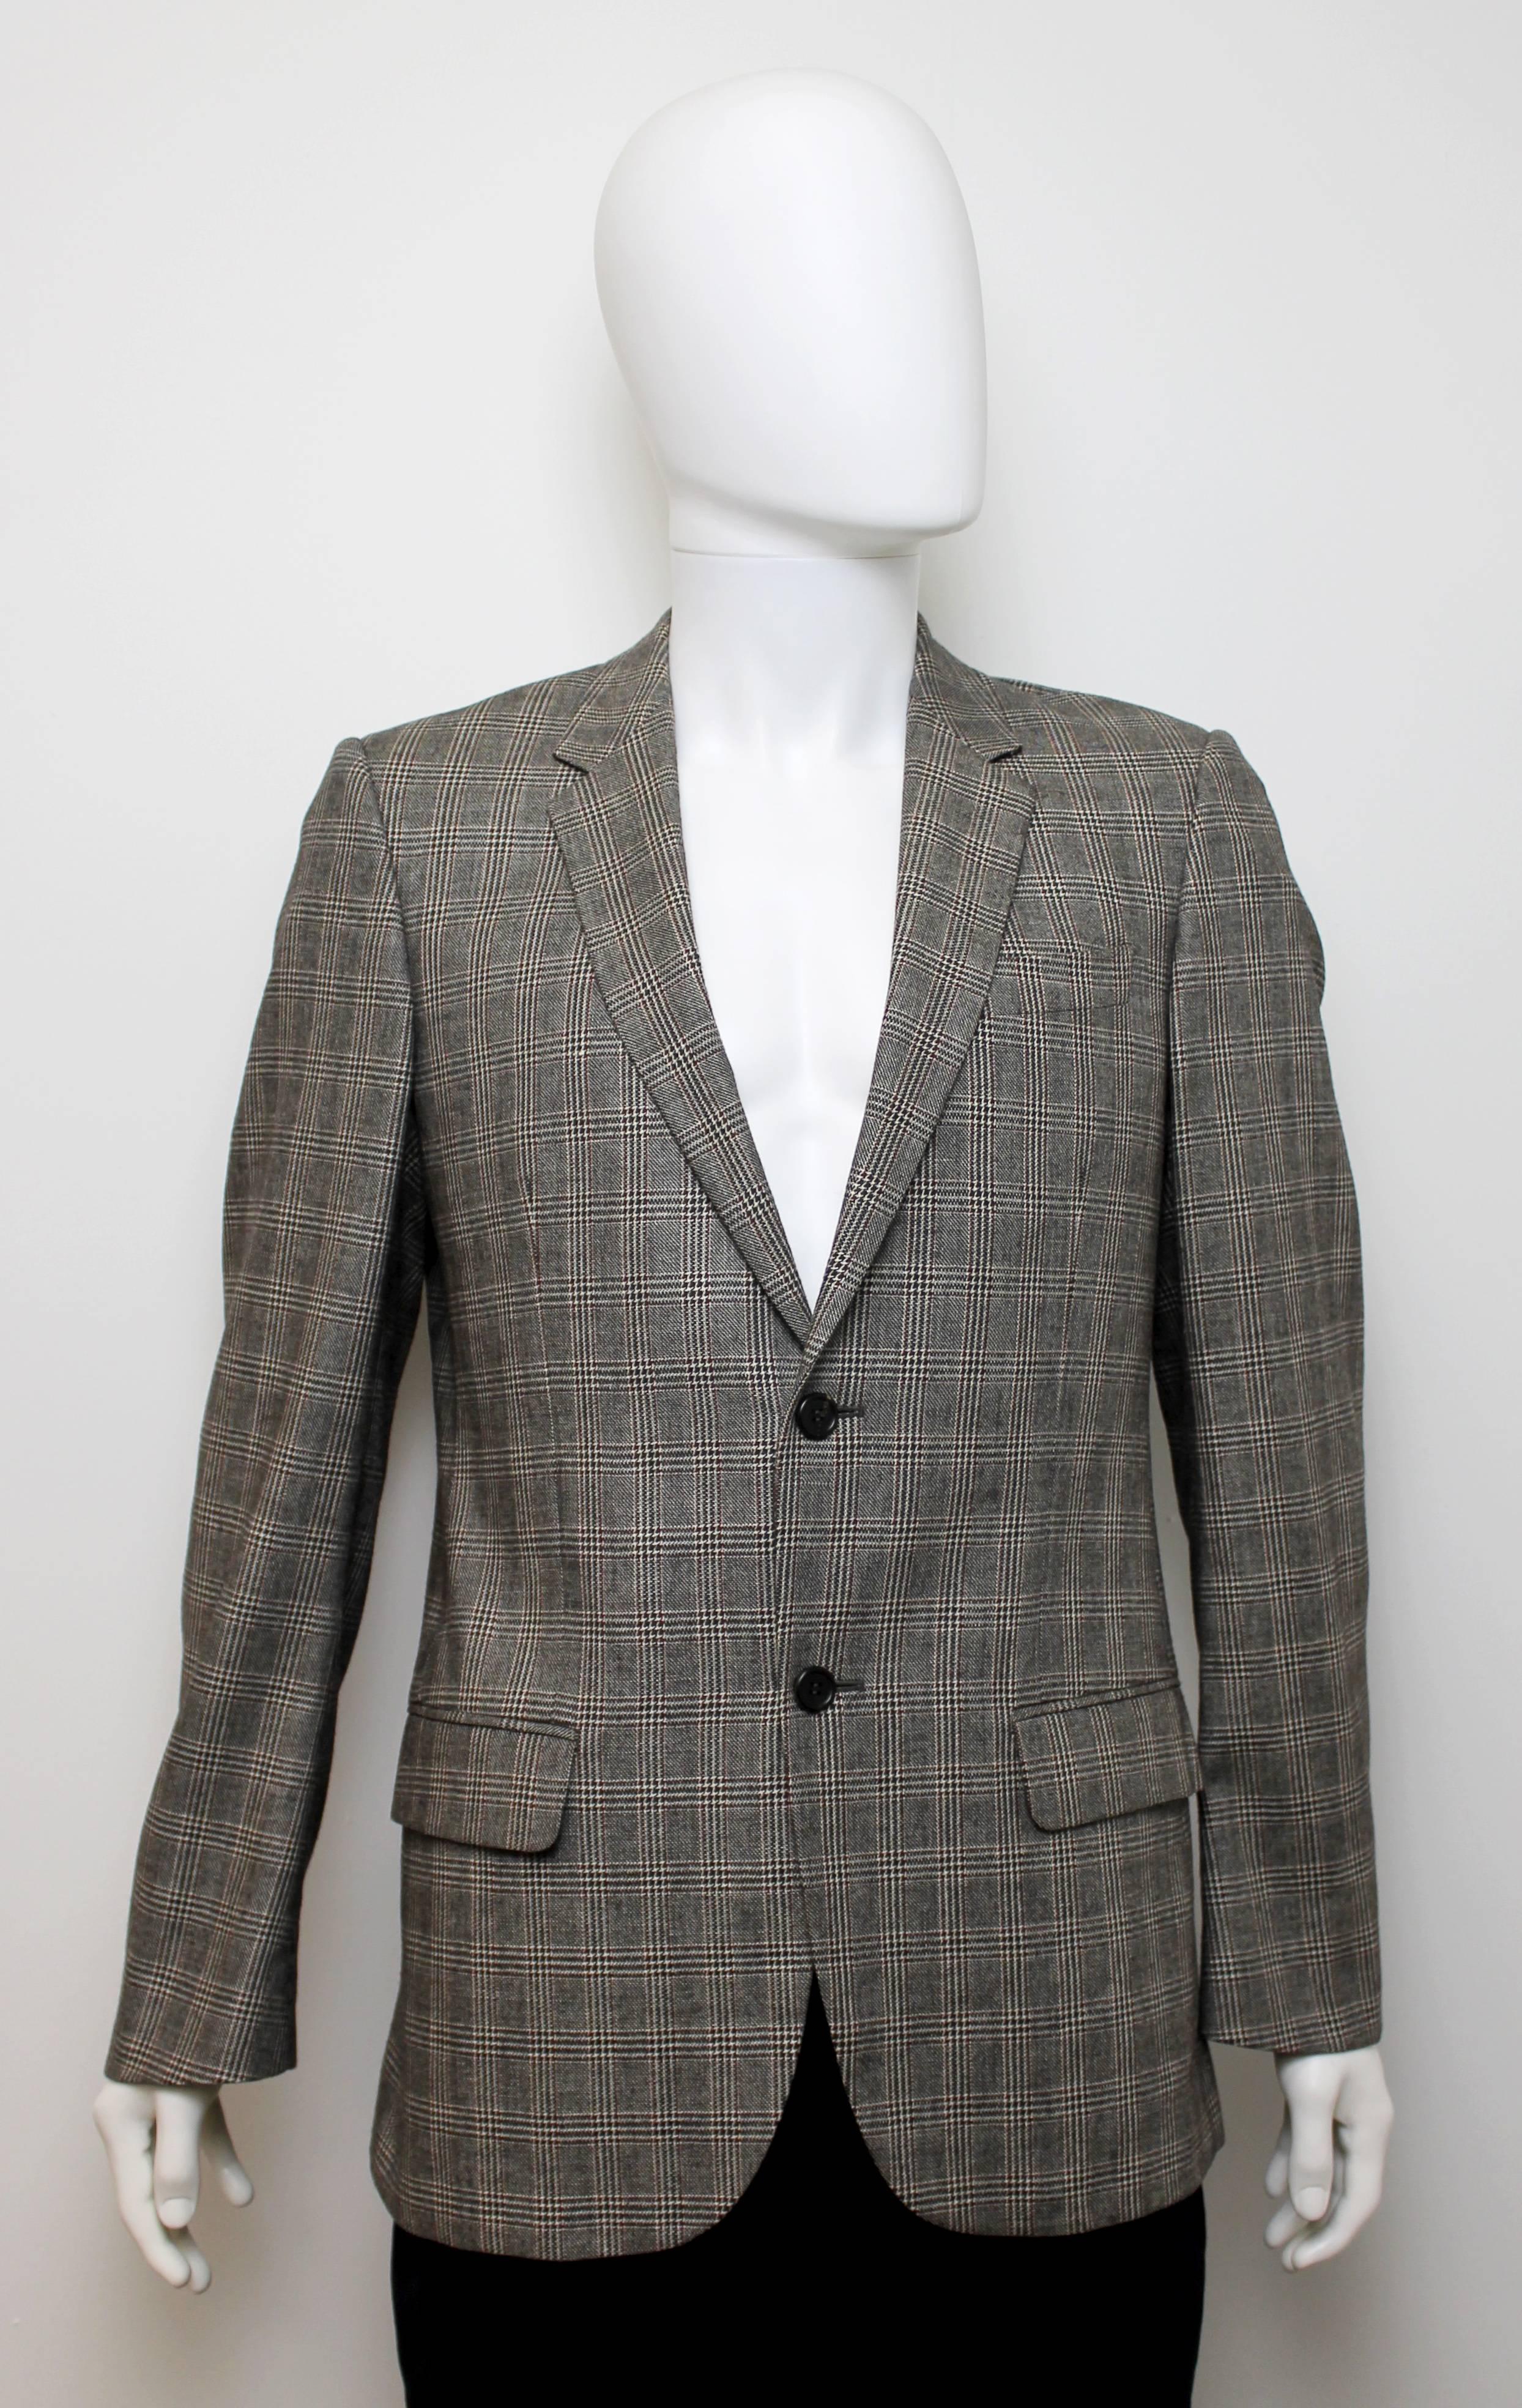 Beautifully tailored jacket and waistcoat ensemble by Alexander McQueen from Autumn-Winter 2006. Features a thin collar and multiple pockets. Can be worn together or separate.